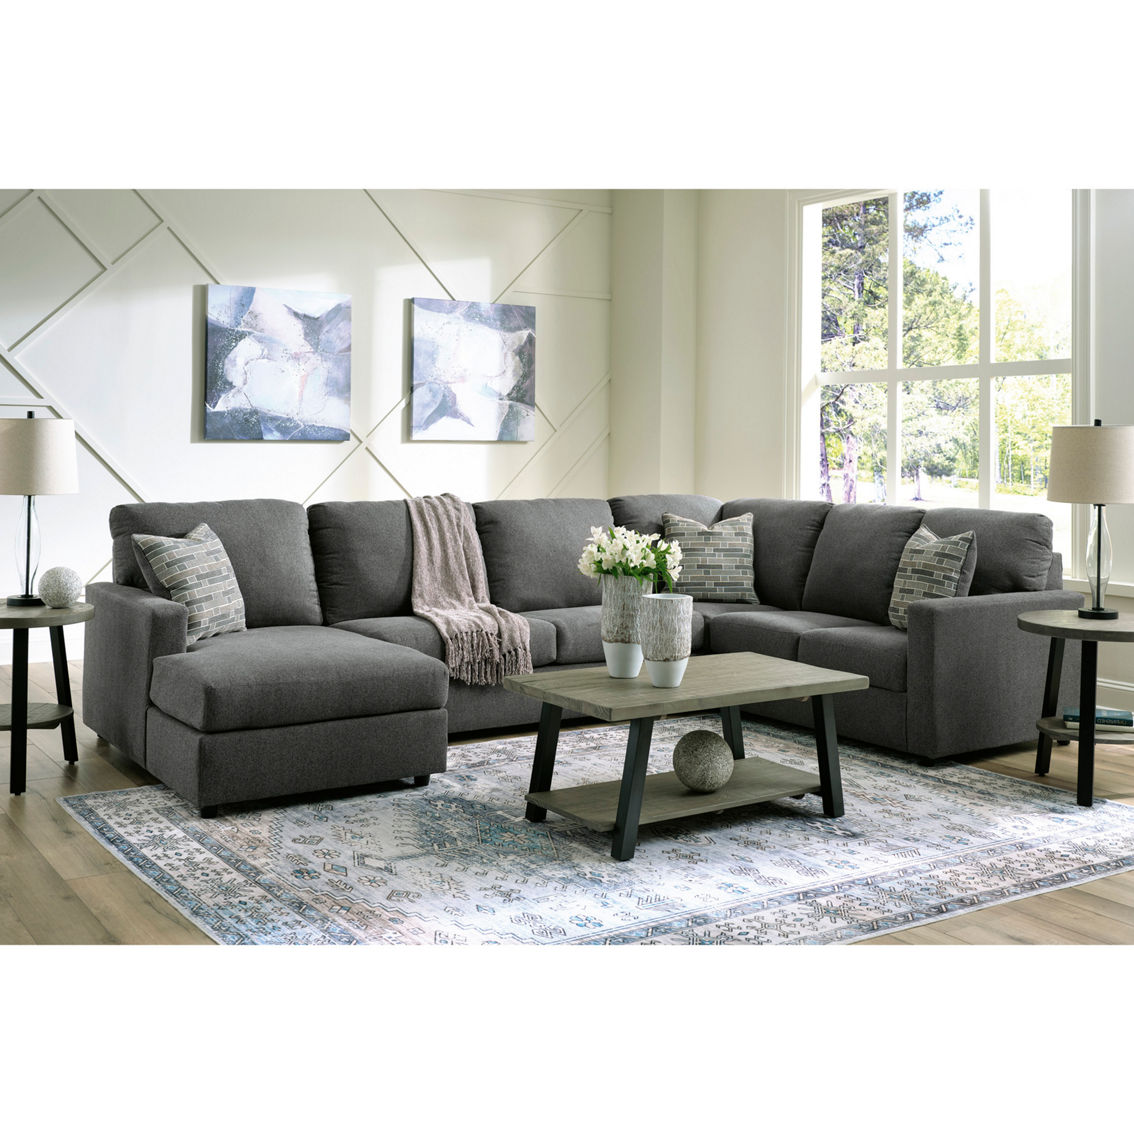 Signature Design by Ashley Edenfield Sectional with Chaise 3 pc. Set - Image 2 of 2